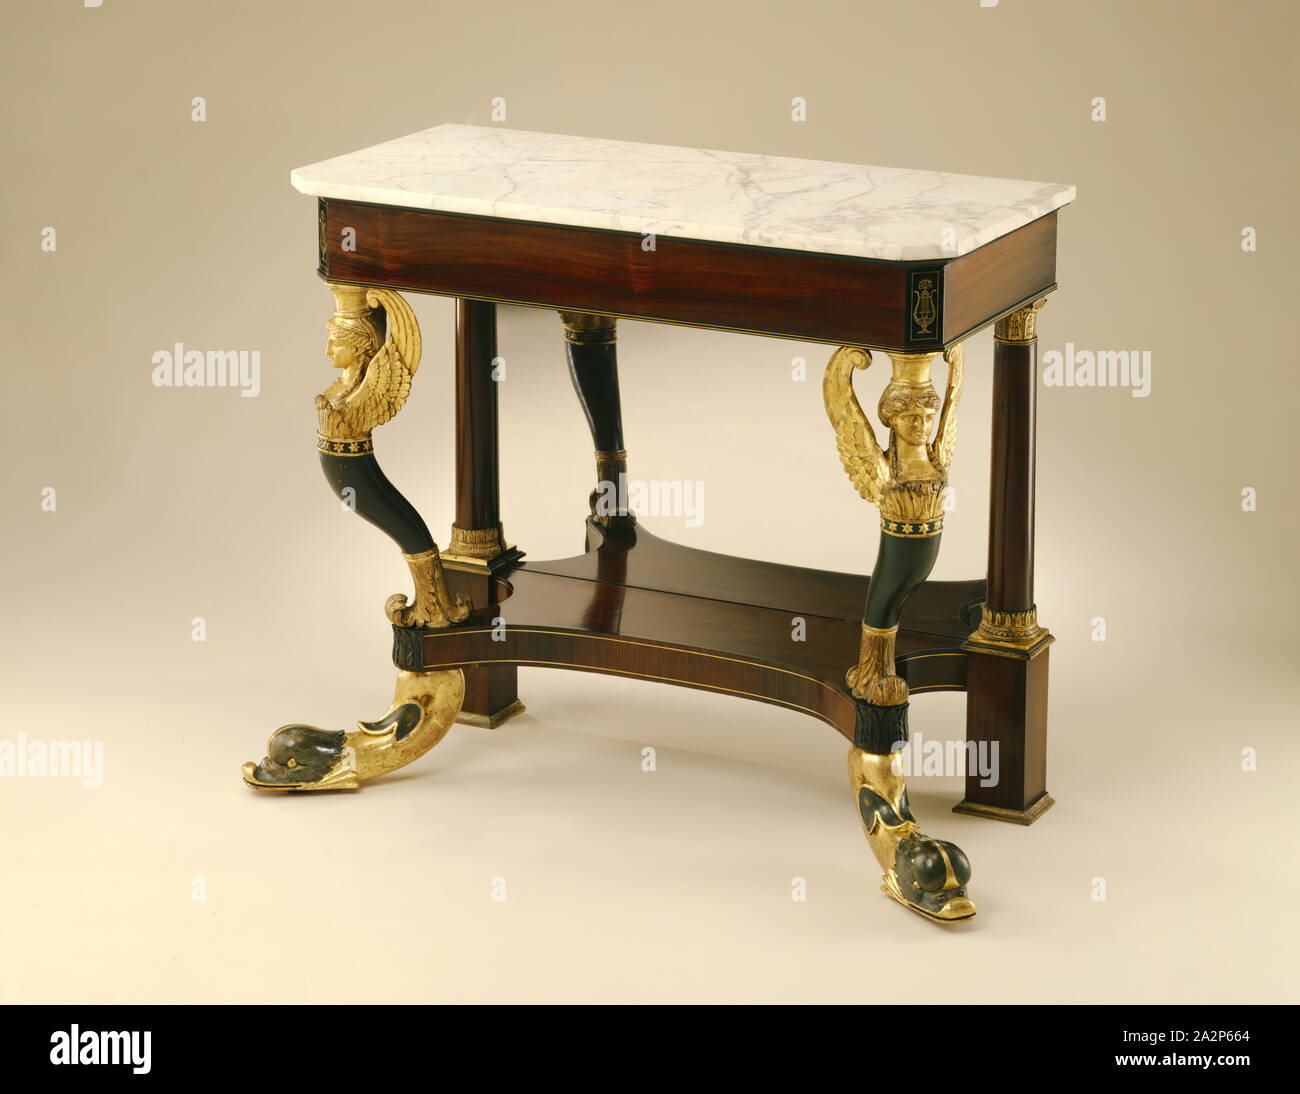 attributed to Charles-Honoré Lannuier, American, 1779-1819, Pier Table, ca. 1815, rosewood, marble, brass, gilt and verd antique, Overall: 34 3/4 × 43 × 20 inches (88.3 × 109.2 × 50.8 cm Stock Photo